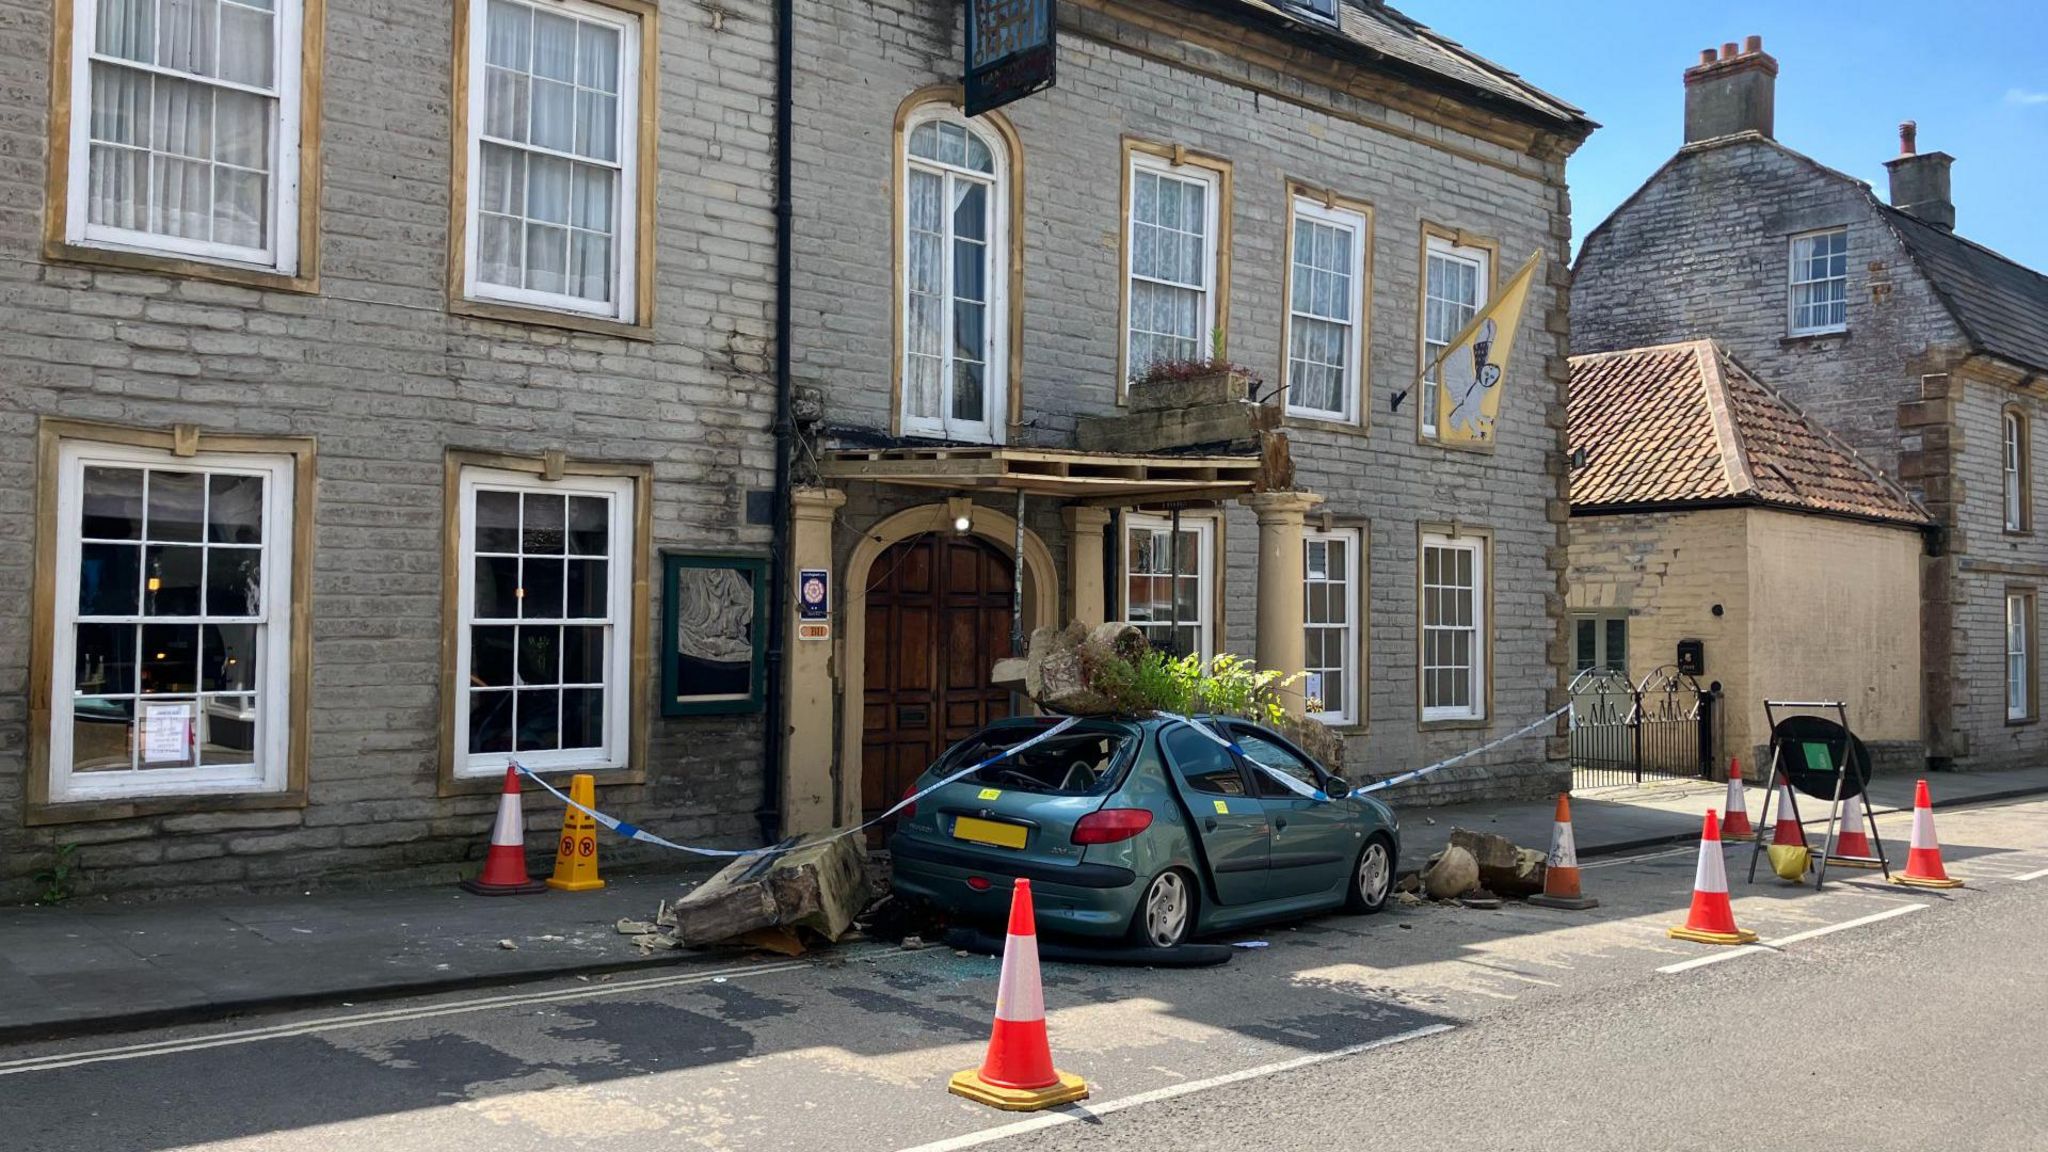 Image of the car which crashed into The Langport Arms in Somerset